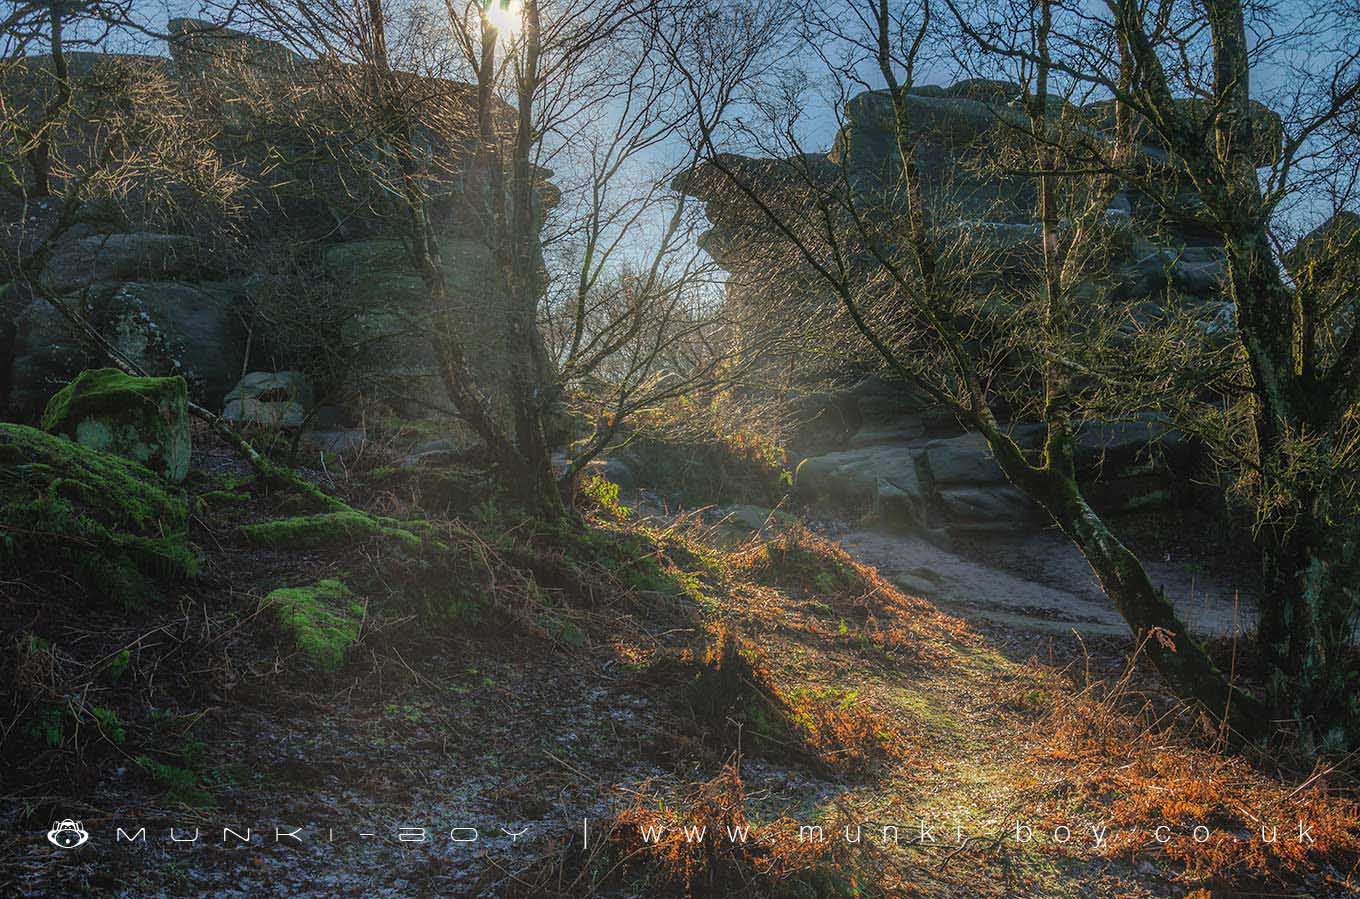 Geological Features in Nidderdale